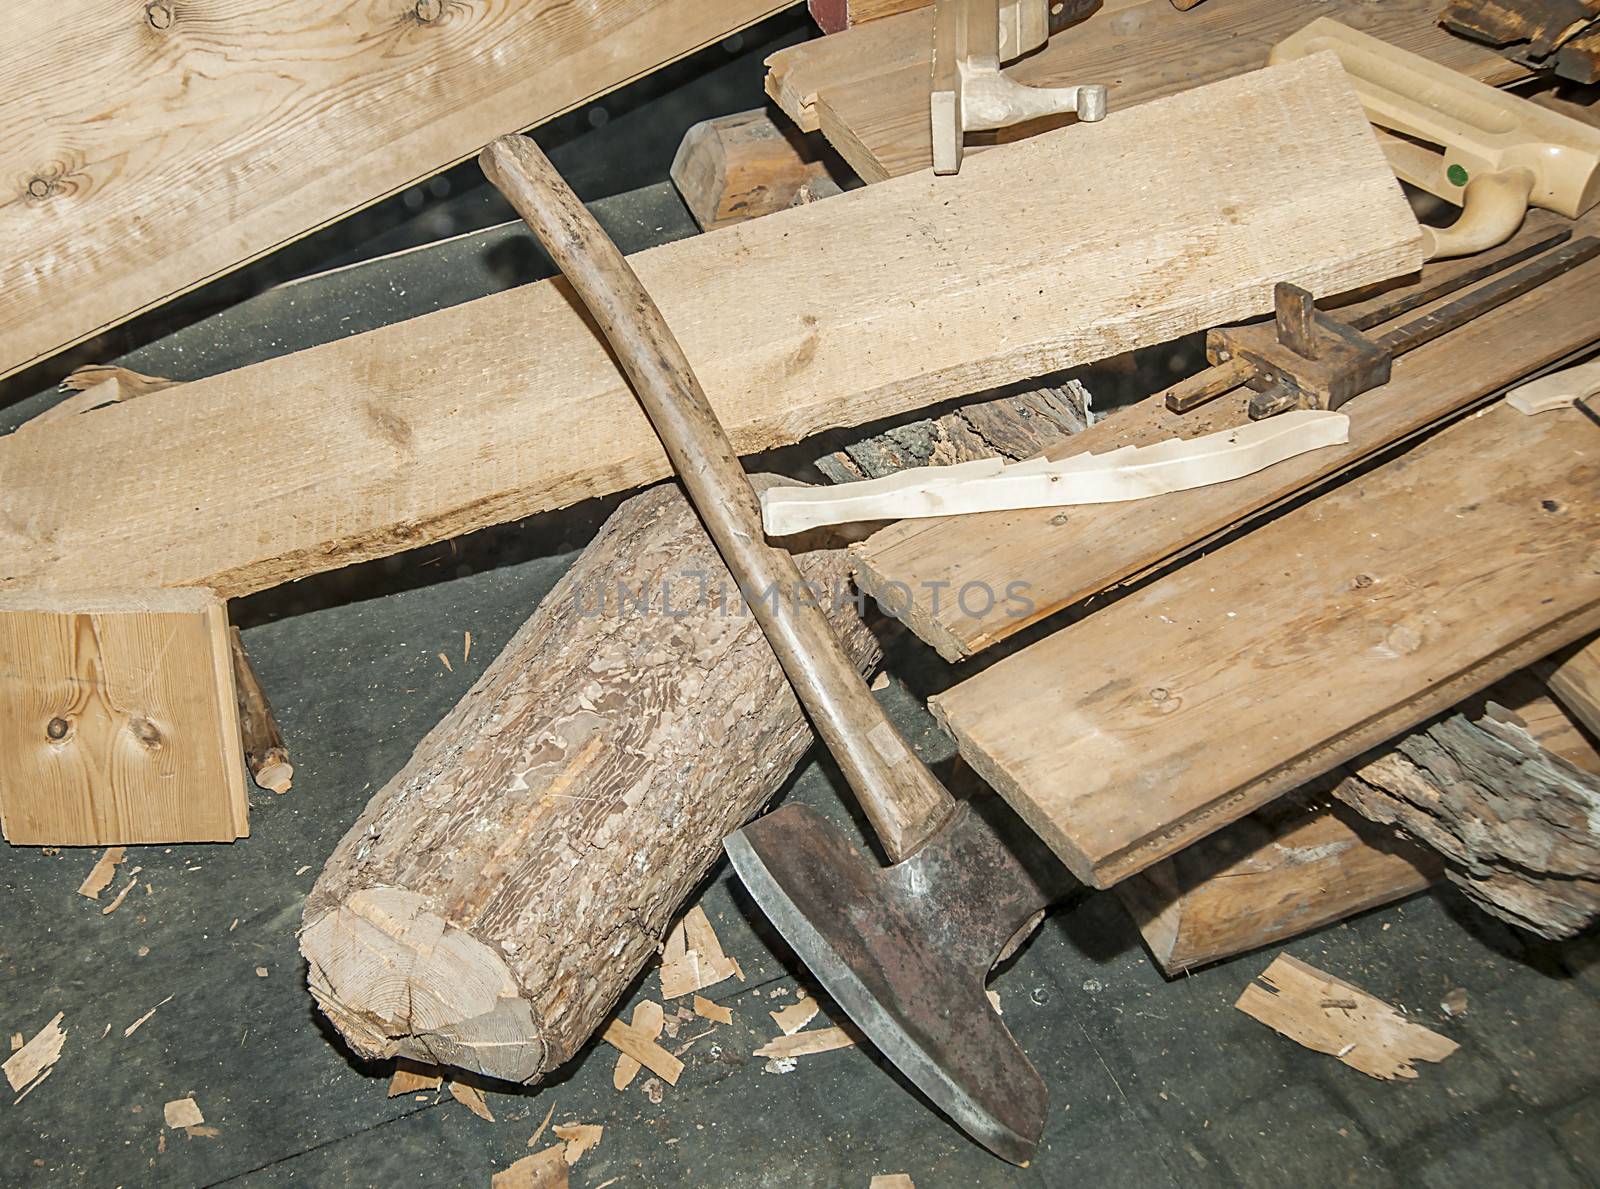 Carpenter wood tool by Alenmax